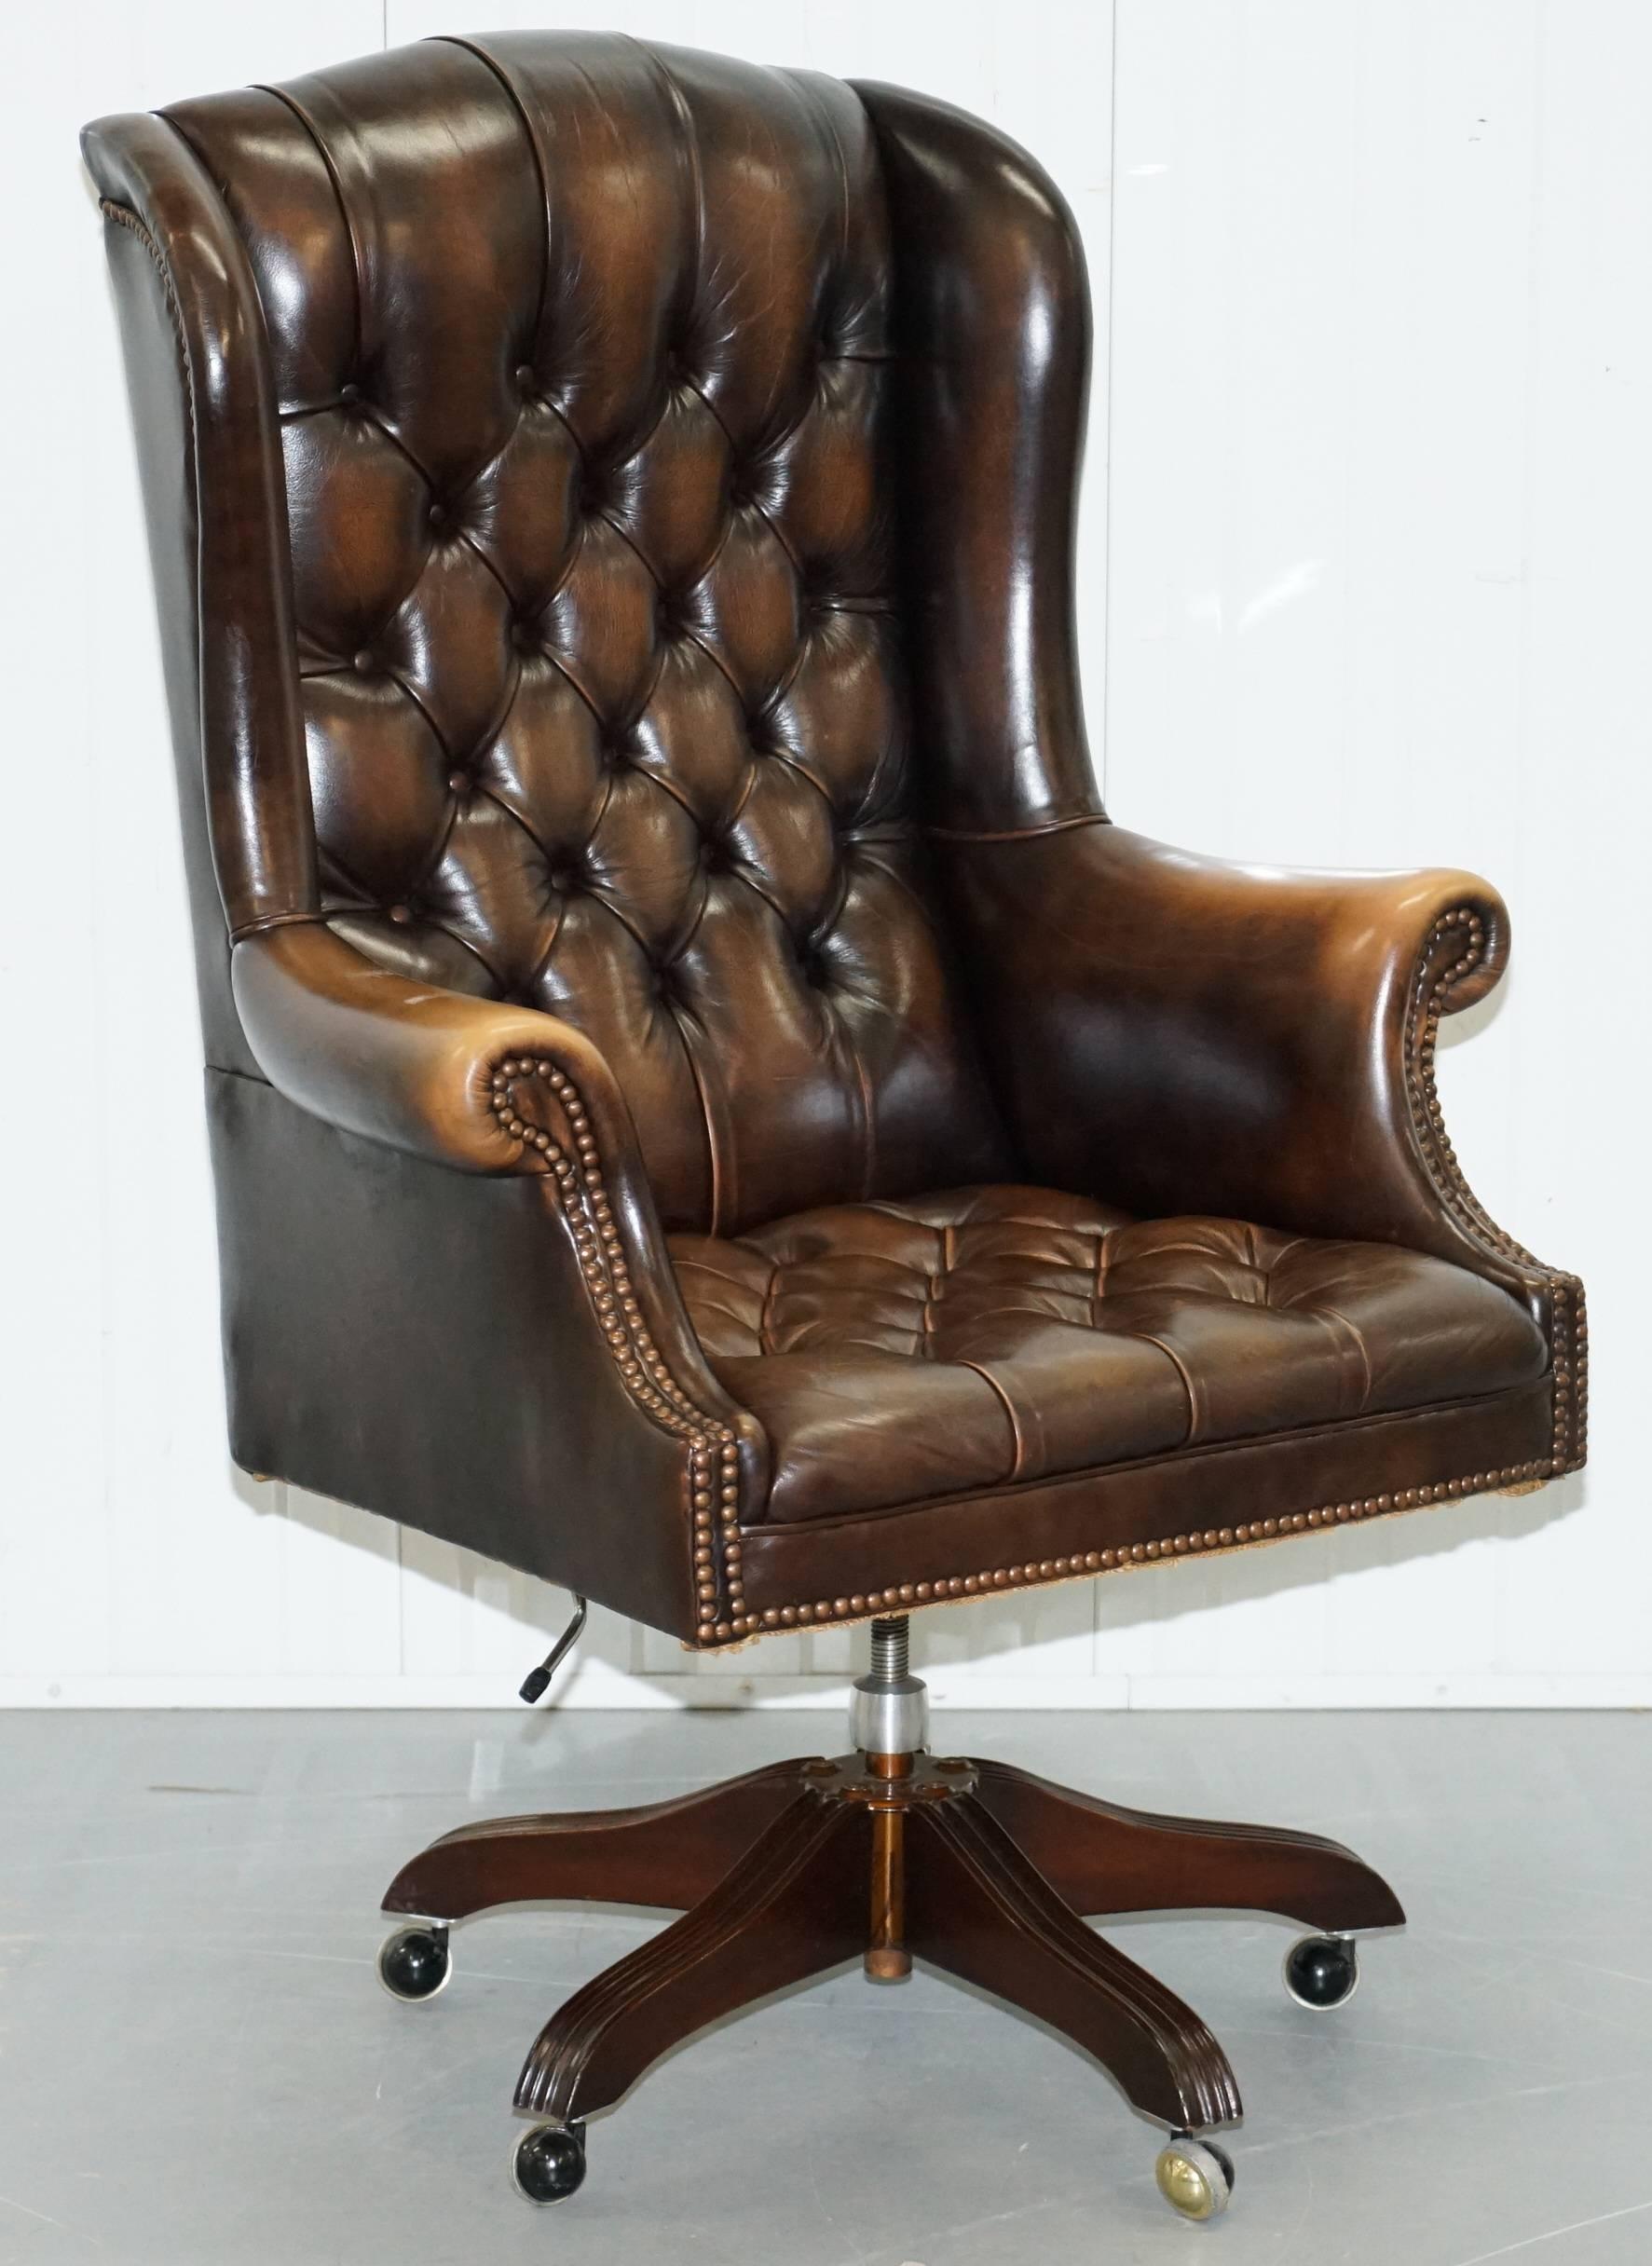 We are delighted to offer for sale this lovely original Wade upholstery Chesterfield aged brown leather wingback captain’s office directors chairs

This is pretty much the most comfortable office captain’s chair on the market today, it's just like